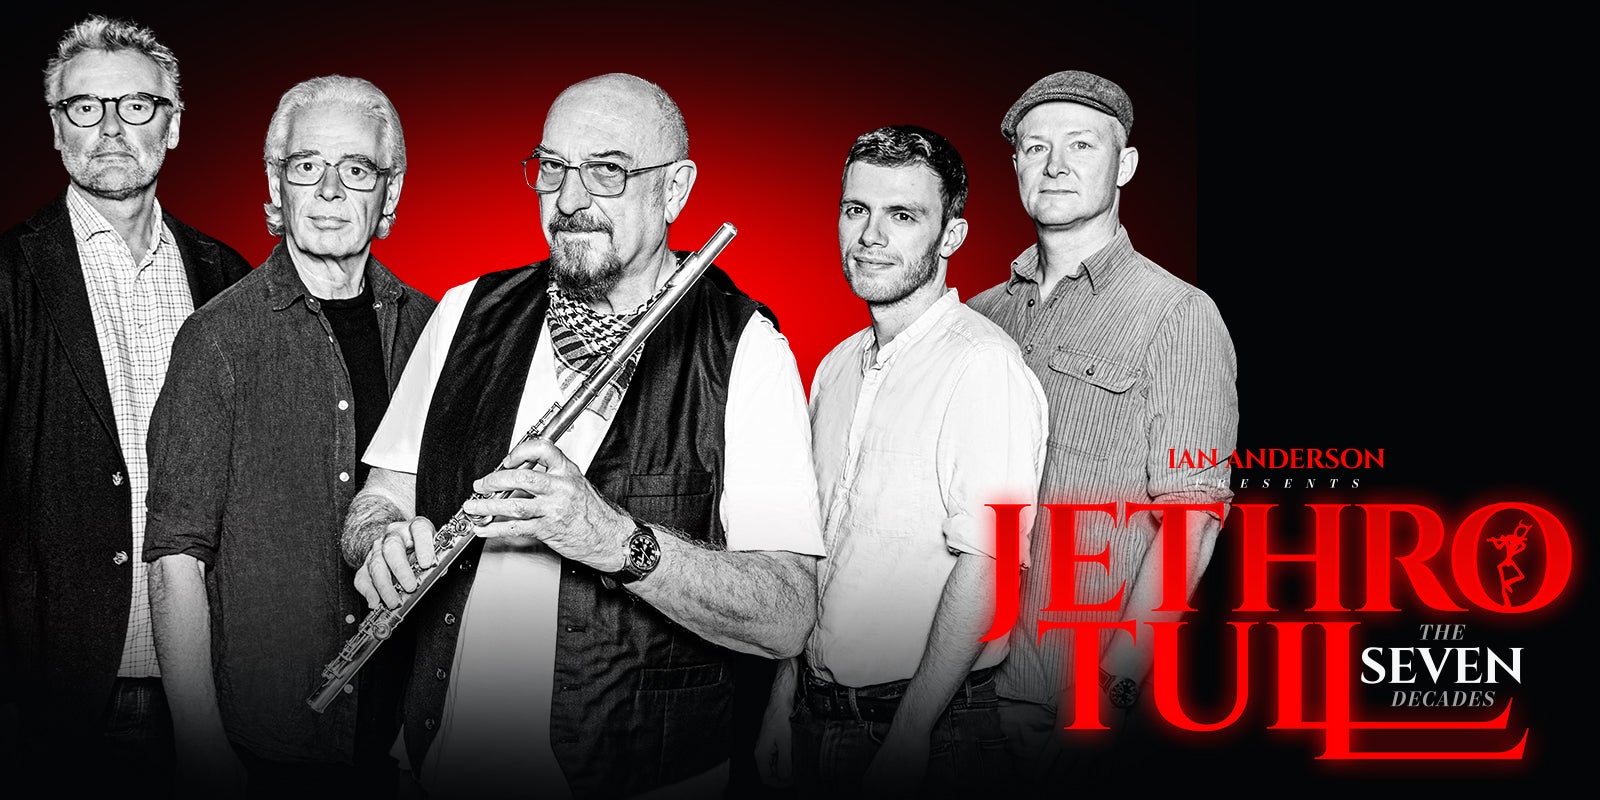 Rock band Jethro Tull coming to the Palace Theatre